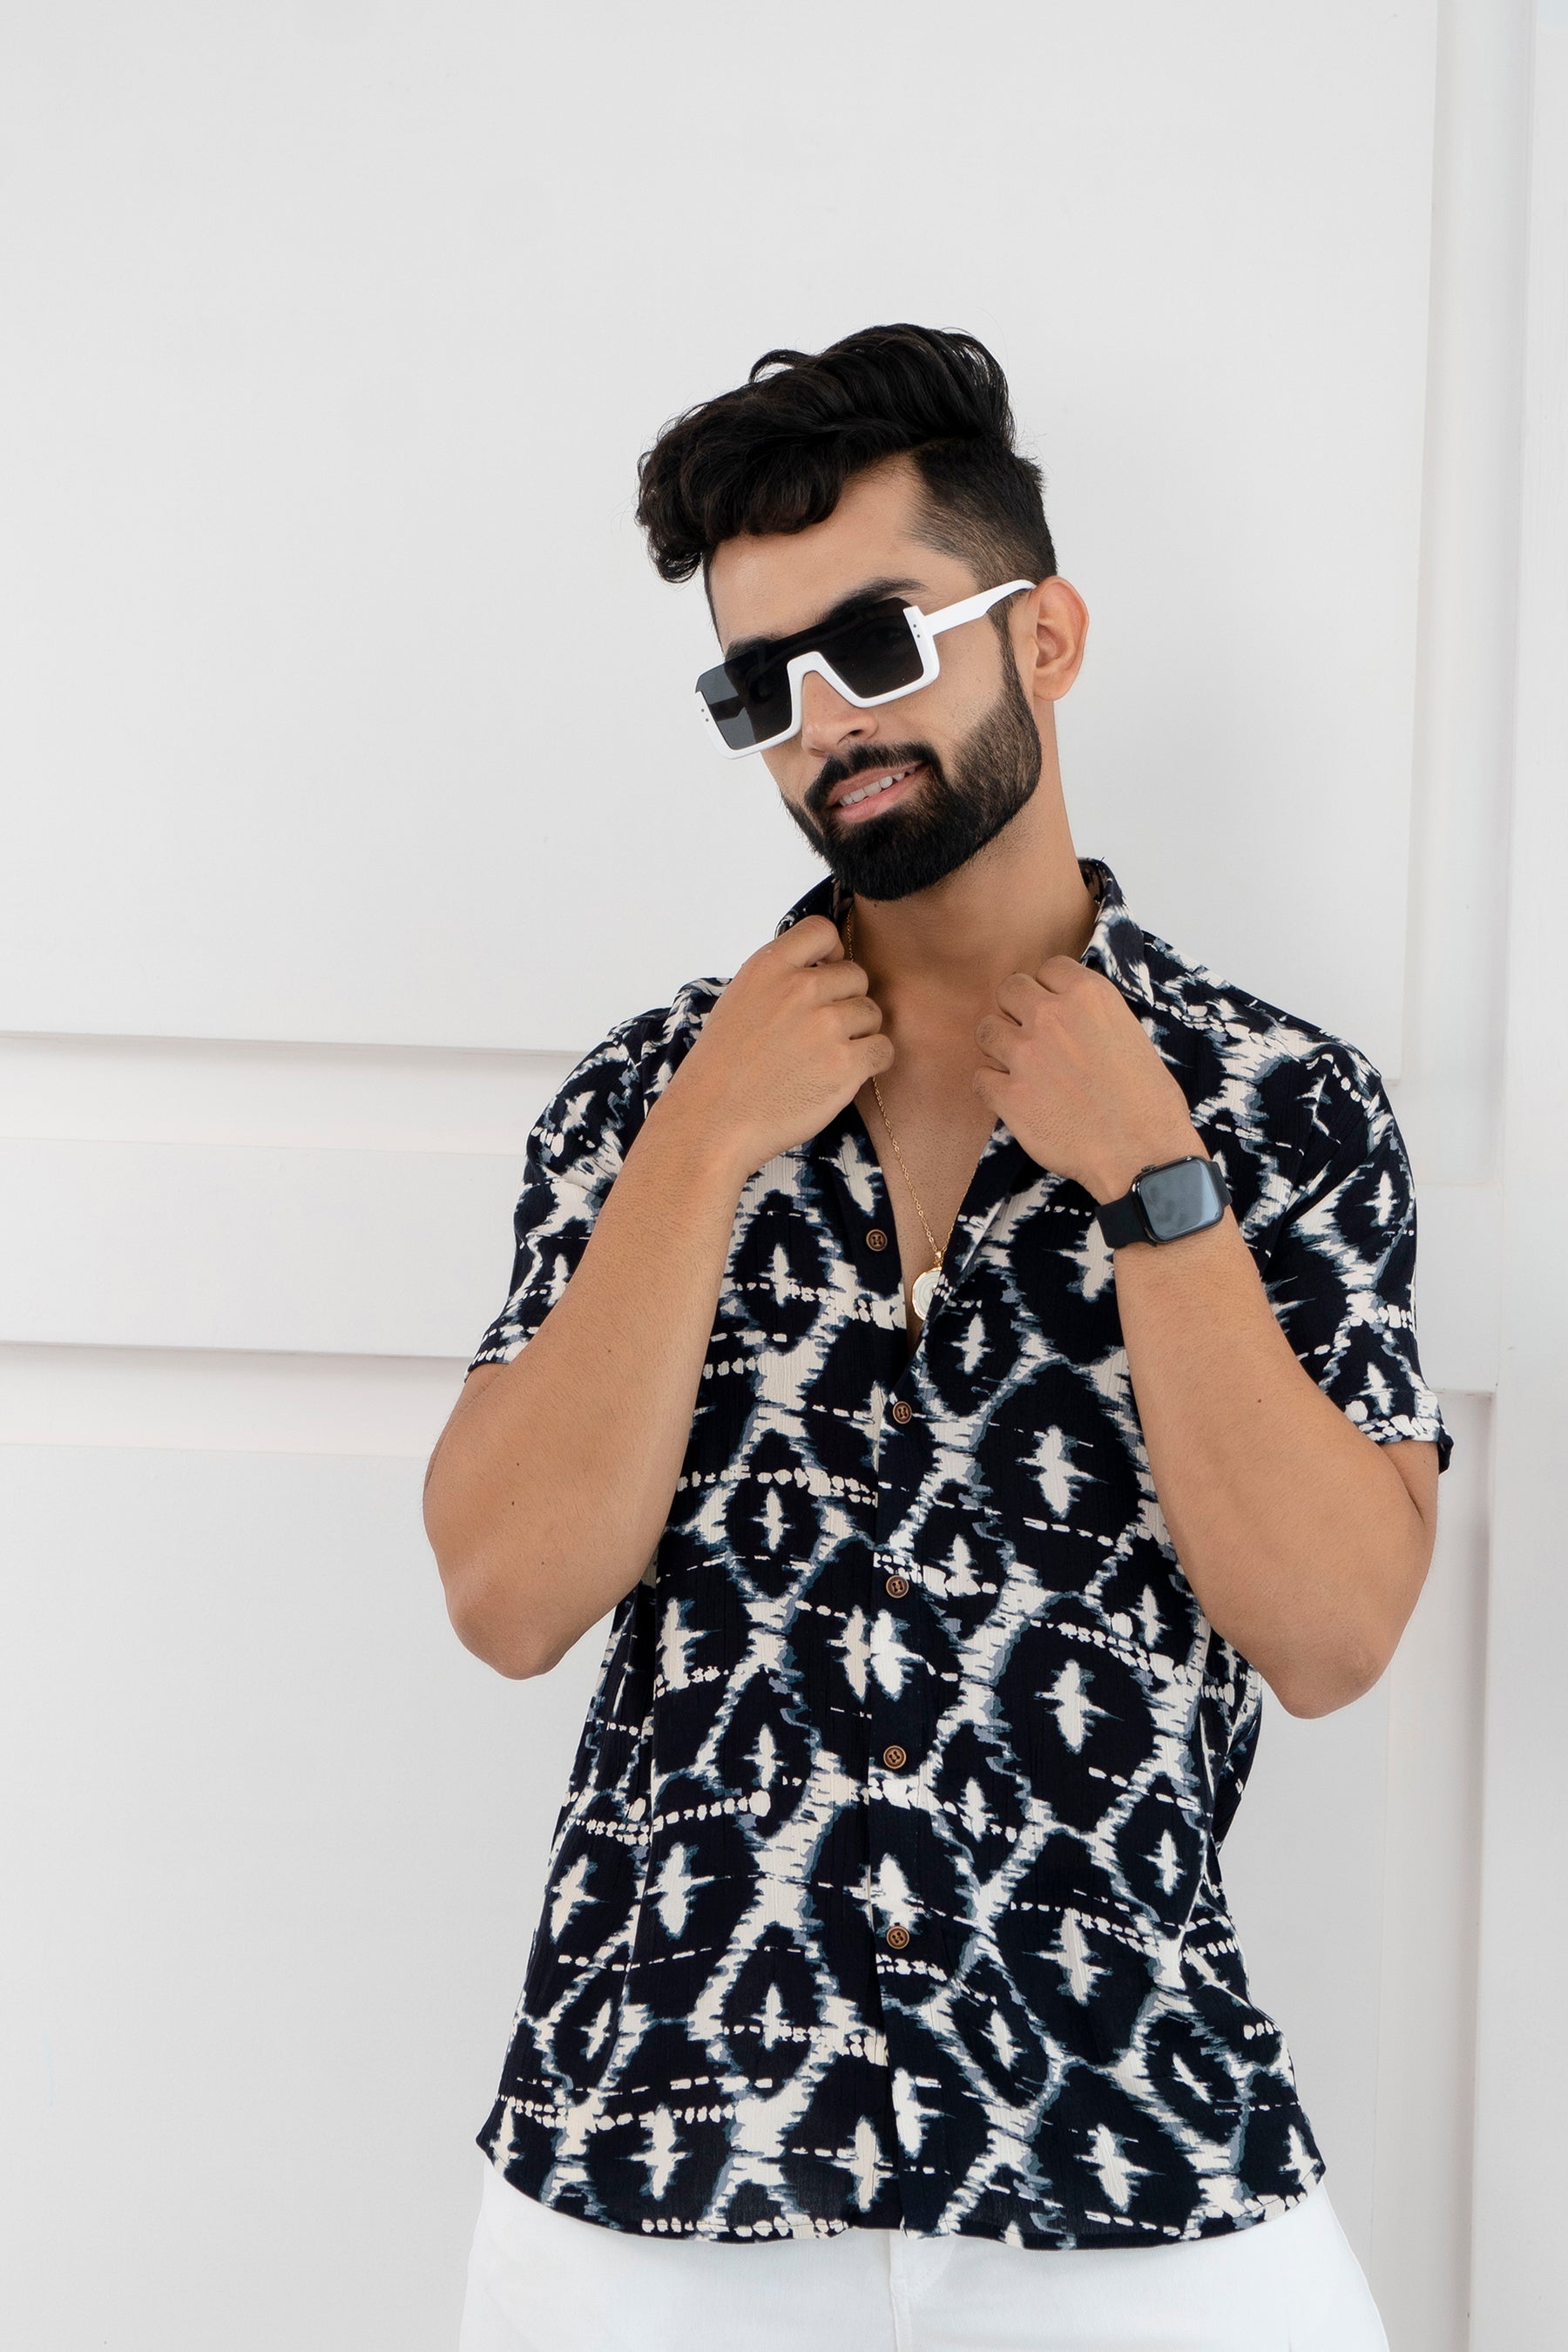 Firangi Yarn Relaxed Fit Super Flowy Re-engineered Cotton Printed Shirt- Half Sleeves (London Black)